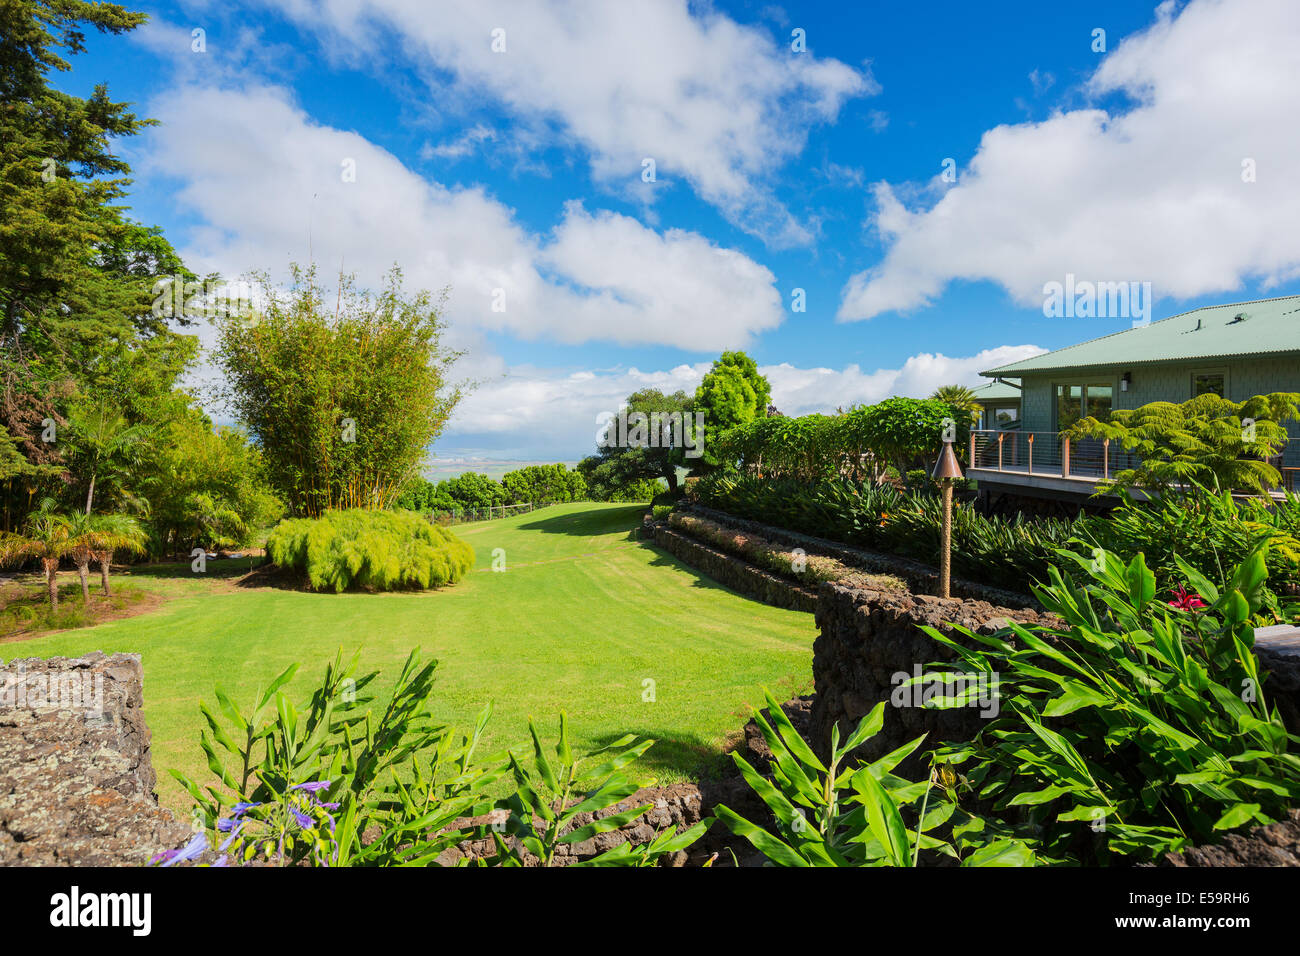 Suburban Home With Garden And Green Grassy Lawn Stock Photo Alamy